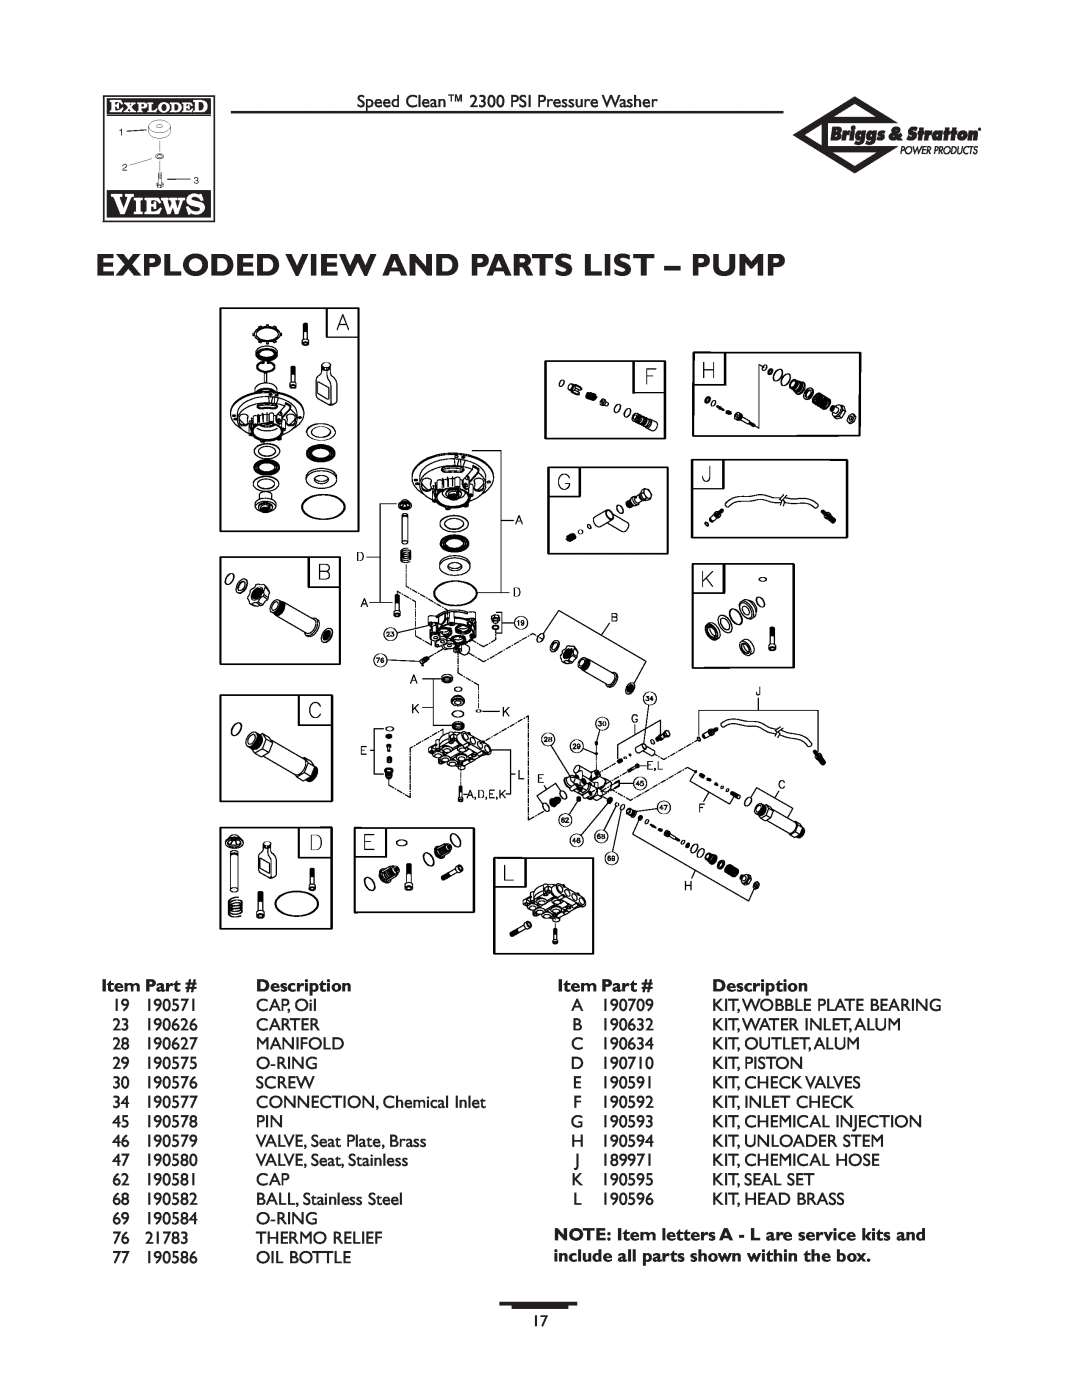 Briggs & Stratton 1909-0 Exploded View And Parts List – Pump, NOTE: Item letters A - L are service kits and, Item Part # 